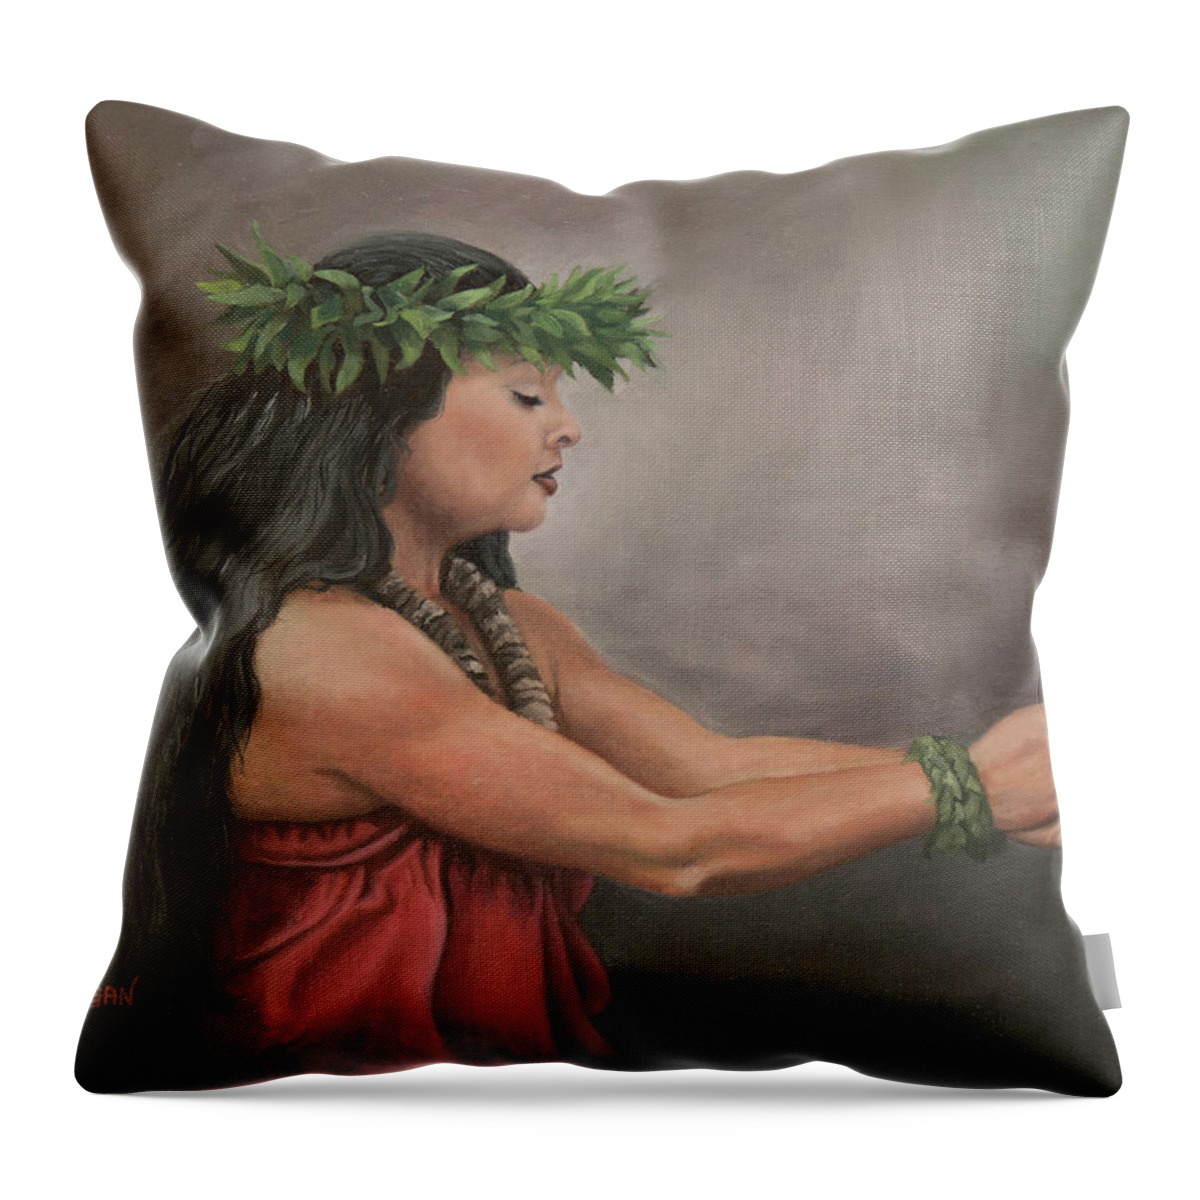 Hawaiian Throw Pillow featuring the painting Mele #1 by Megan Collins